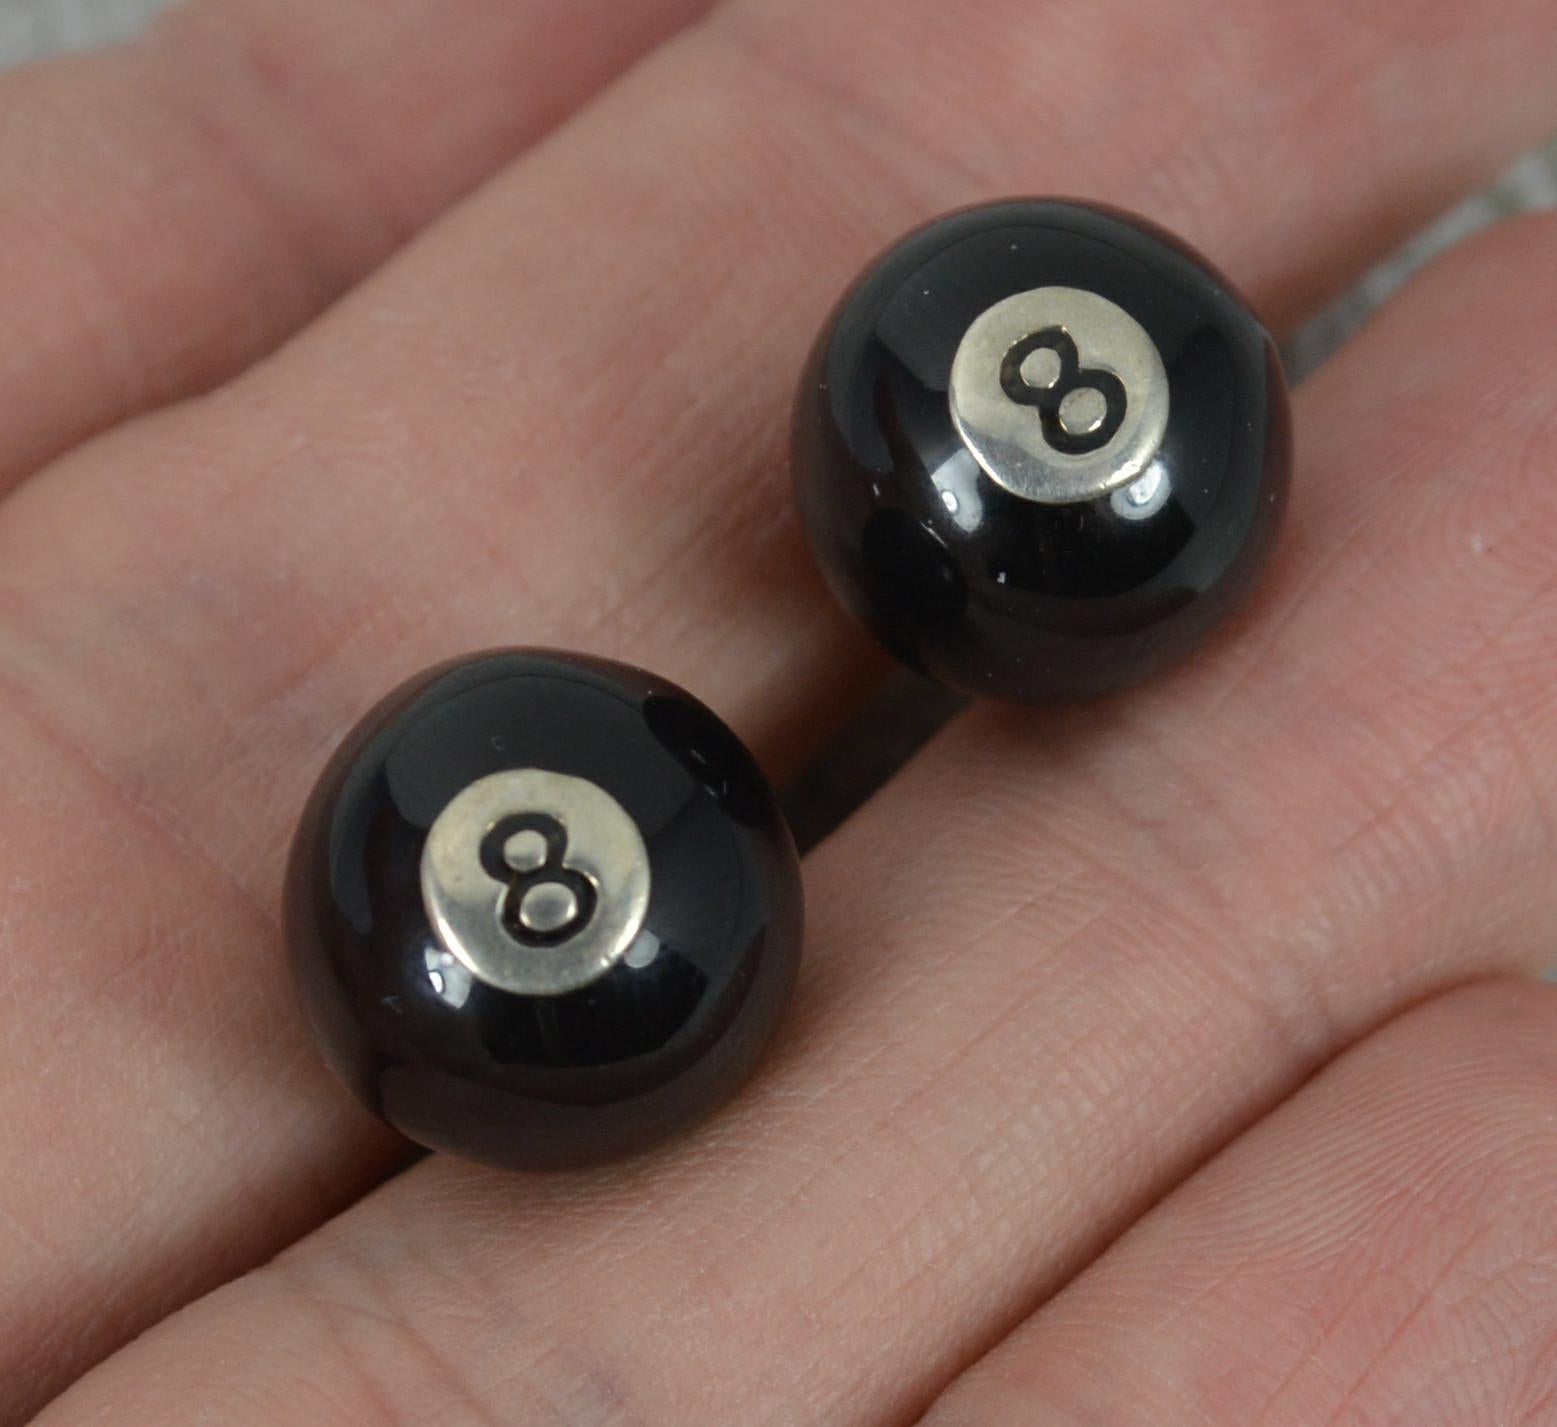 A contemporary pair of designer cufflinks.
Sterling silver and black enamel.
8 ball pool design.
By Deakin and Francis.

Hallmarks ; Deakin Francis, full English hallmarks
Weight ; 17.6 grams
Size ; 12mm diameter ball
Condition ; Very good. Crisp